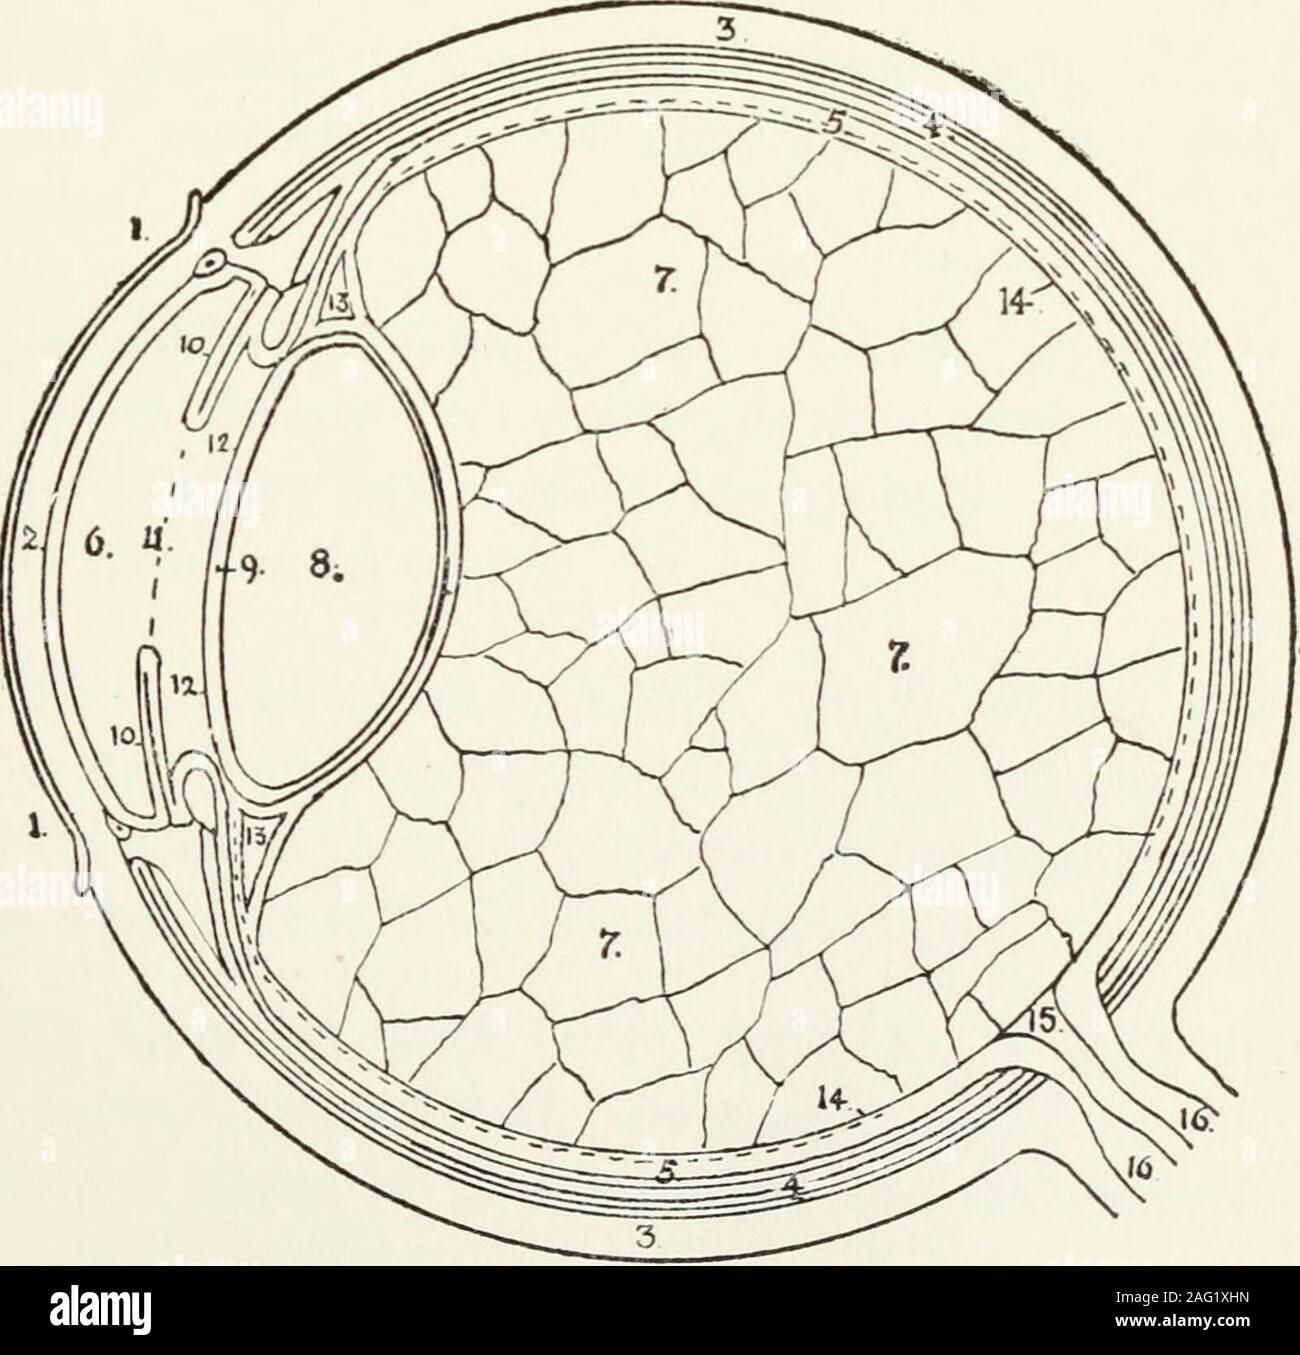 . Elementary lectures on veterinary science, for agricultural students, farmers, and stockkeepers ... A. THE EYE &lt;^ Pupi]. 2,2. The Iris. 3. MembranaNictitans or Haw. 4. Puncta Lachry-mahs. 5. Upper Lid cut across, shewing 6. 6. Lachrymal Gland7. Corpora Nigra. 8. Outer Canthus. 9. Inner Canthus. ^ 10, 10. Mei-bomian Glands. 11. Lachrymal Canal. B.. B. SECTION OF THE EYEConjunctiva. 2. The Cornea. 3, 3. Sclerotic Coat. 4,4. Choroid Coat.5,5. Retina. 6. Anterior Division of Aqueous Chamber. 7,7. VitreousHumour—Posterior Chamber. 8. Crystalline Lens. 9. Capsule of Crys-talline Lens. 10, 10. I Stock Photo